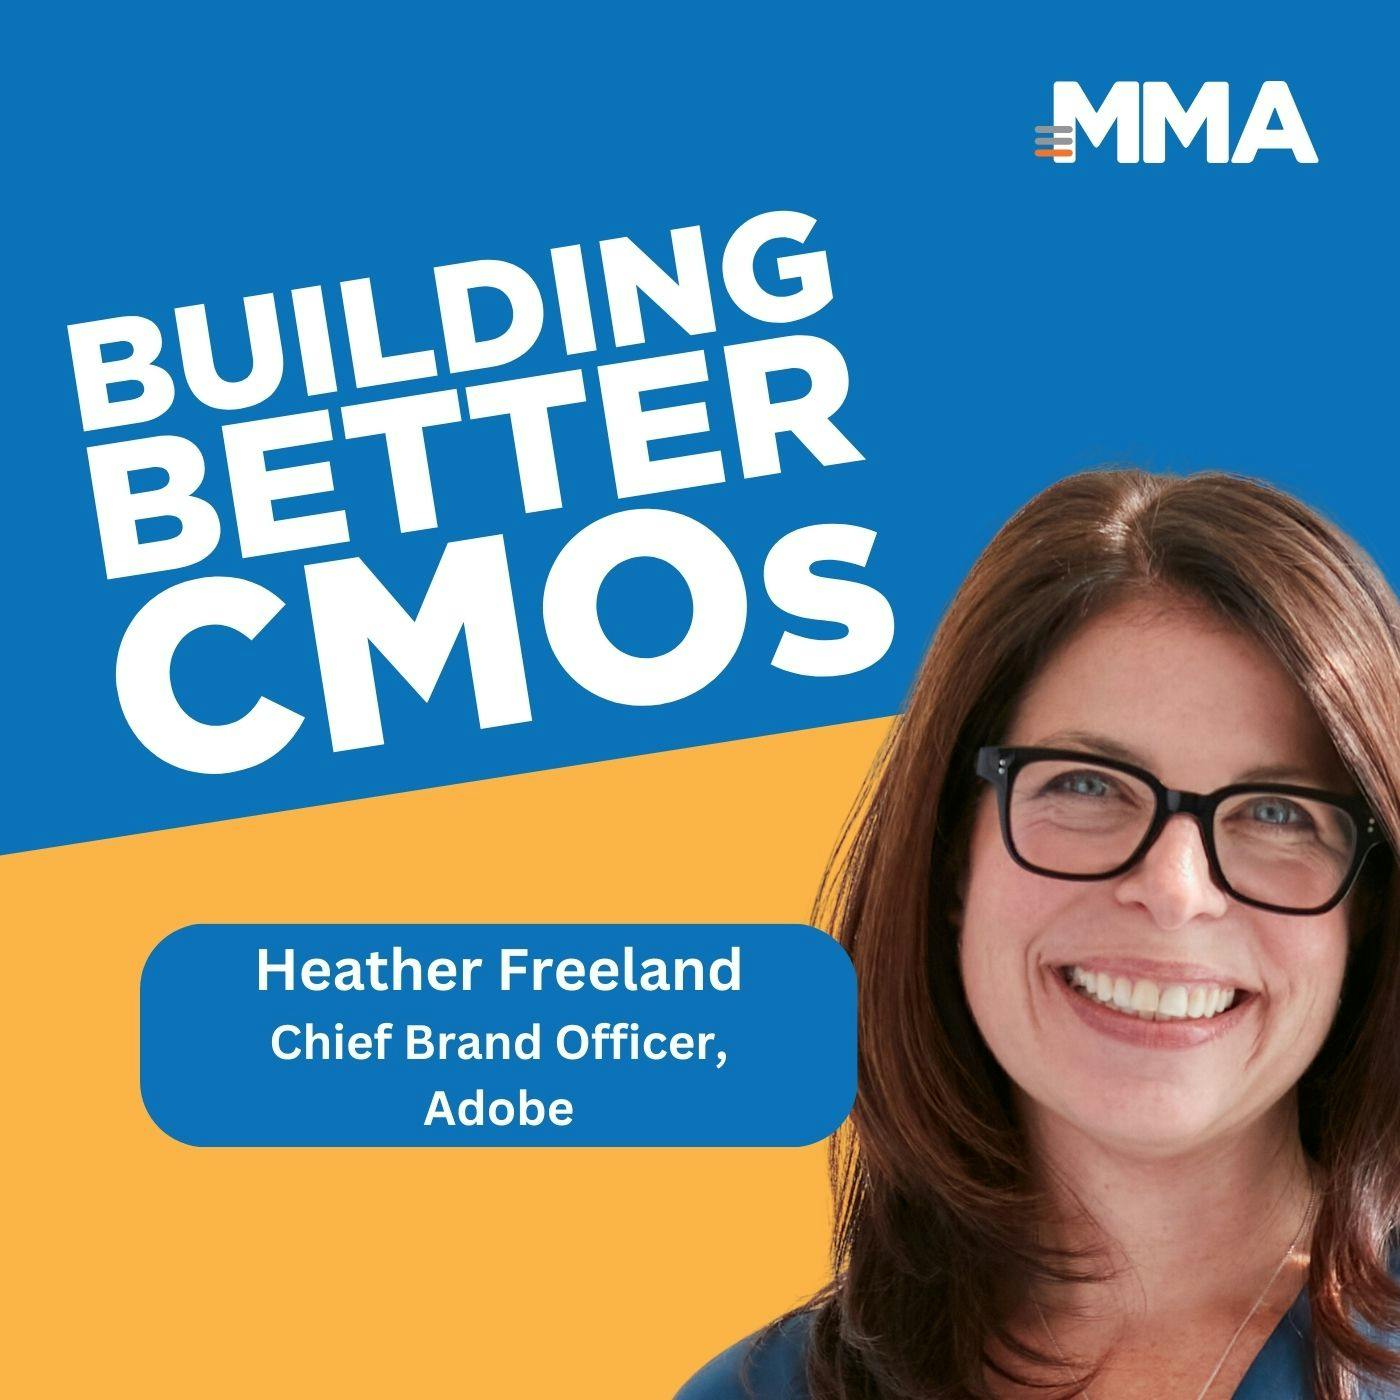 Heather Freeland, Chief Brand Officer of Adobe: Advertising is Overrated